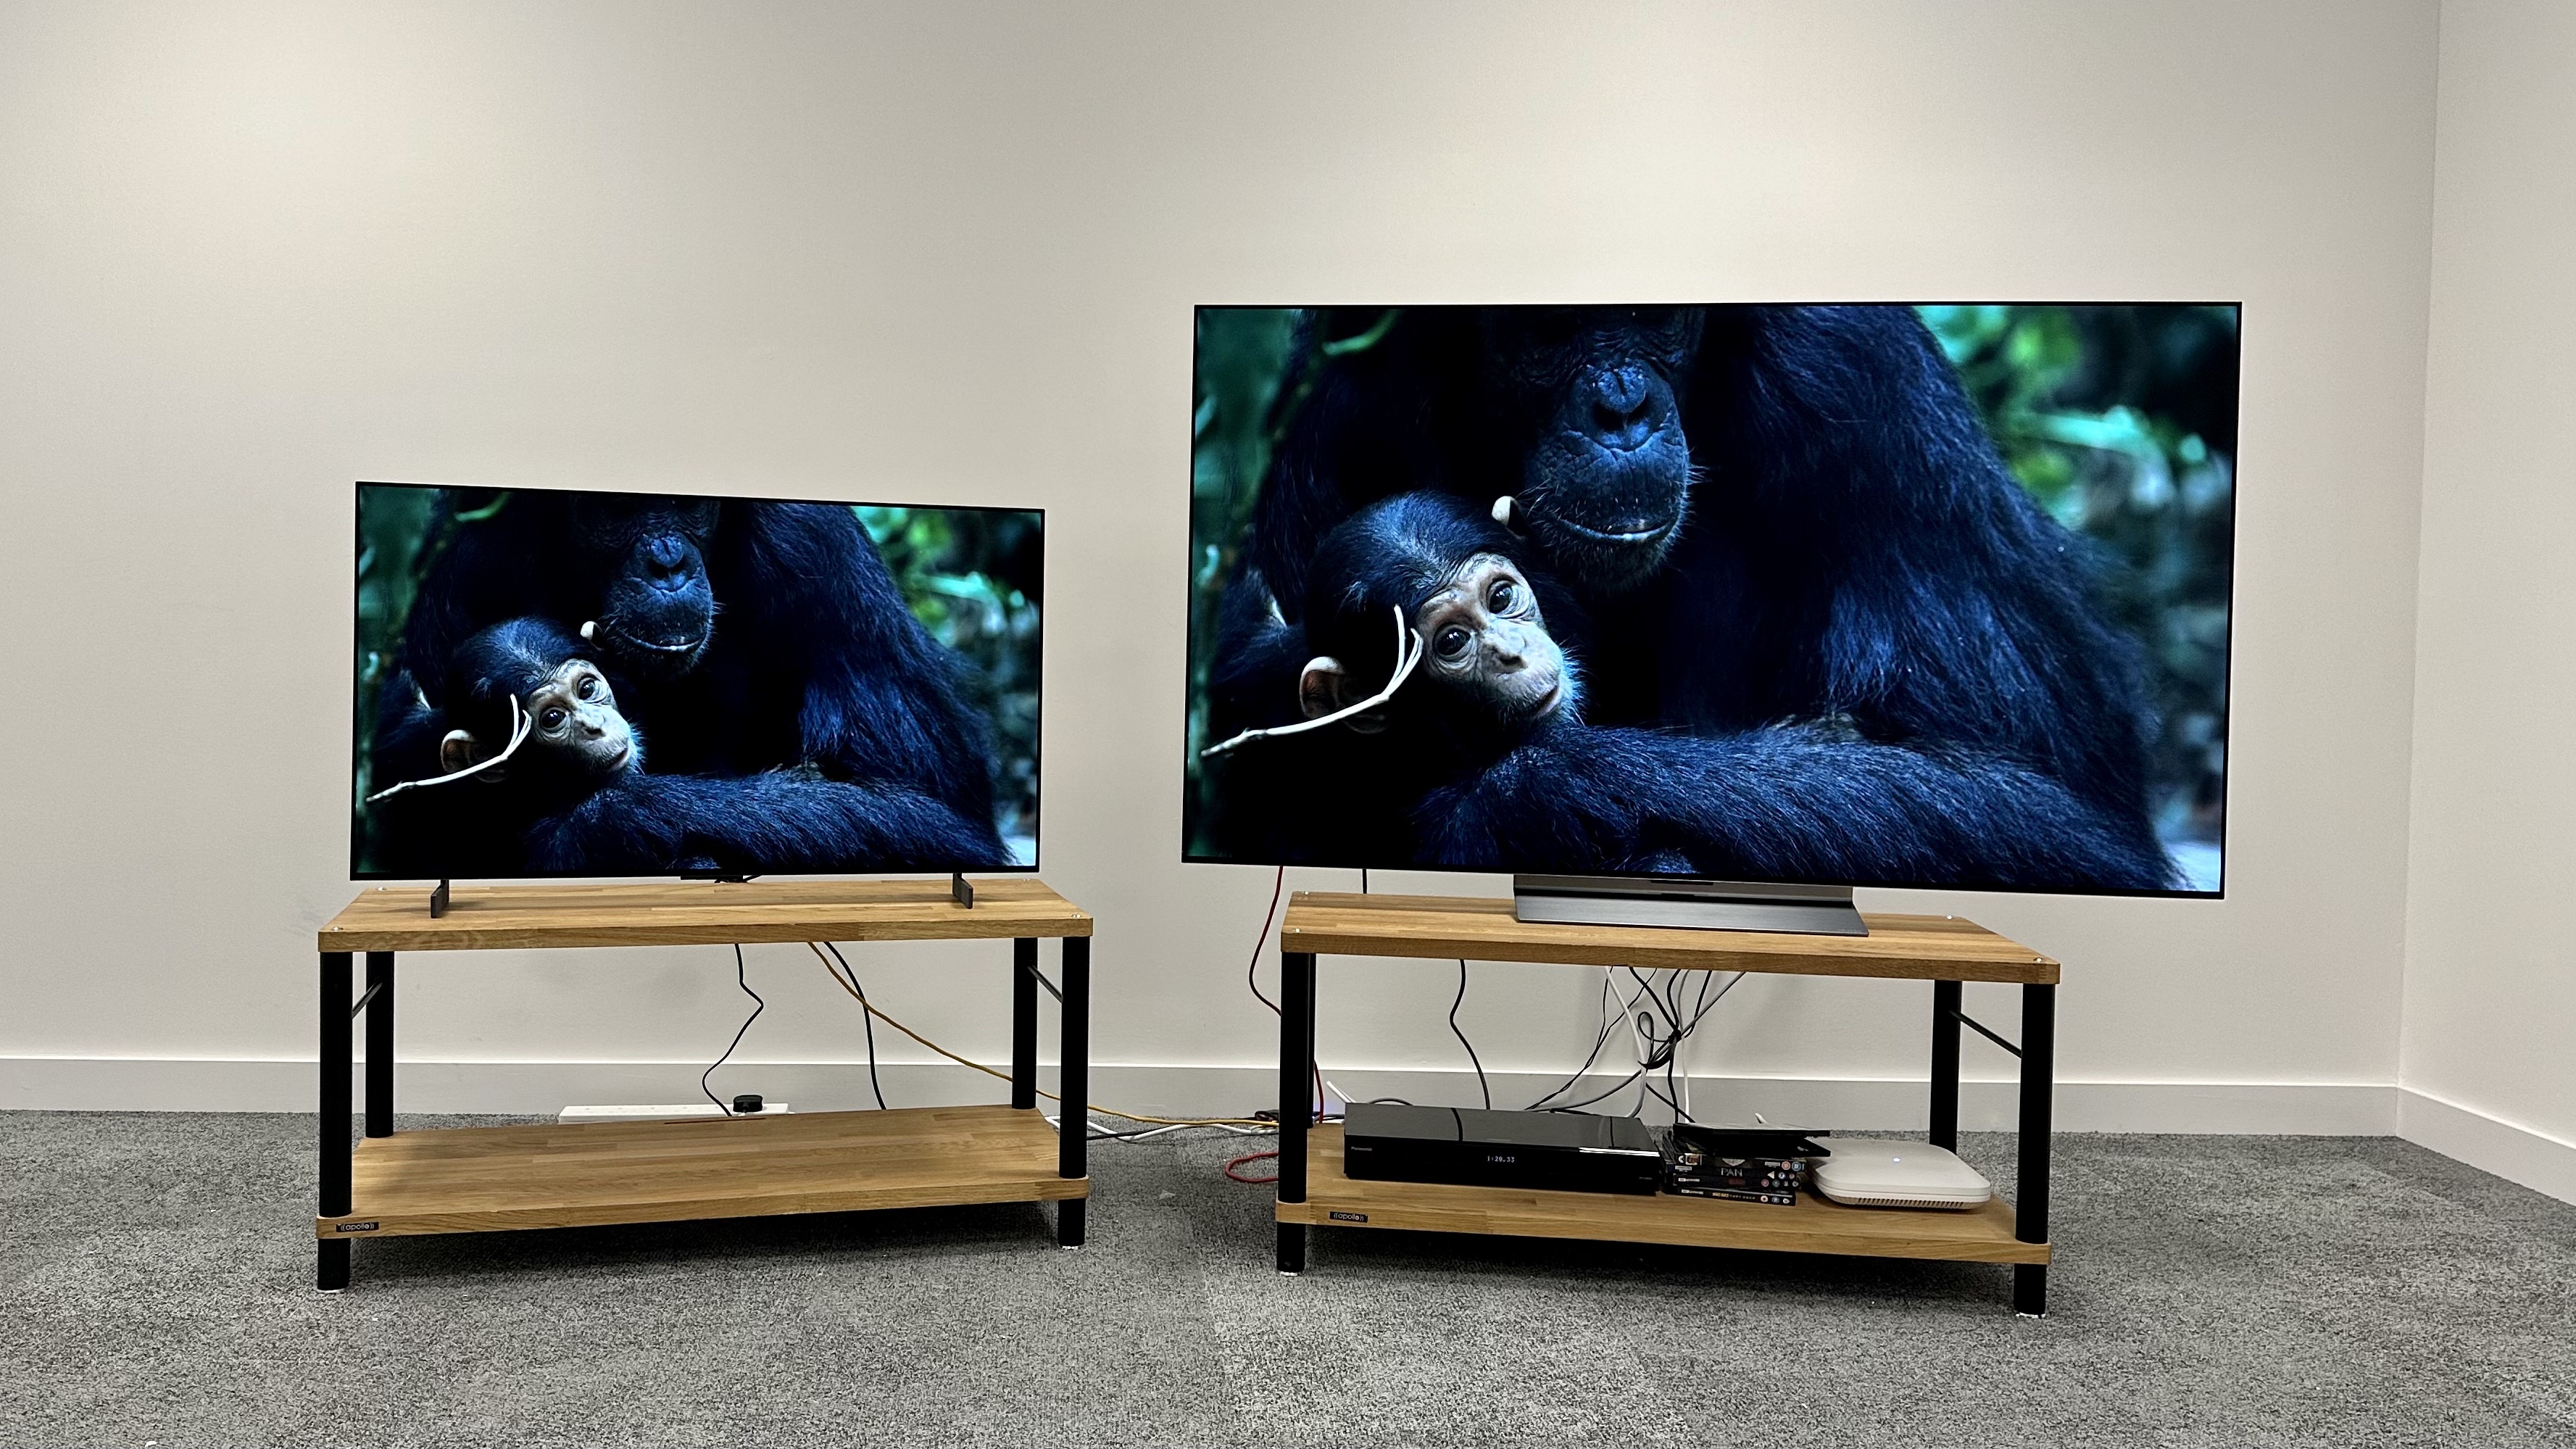 9 essential (but simple) tips to get the best out of your LG OLED TV